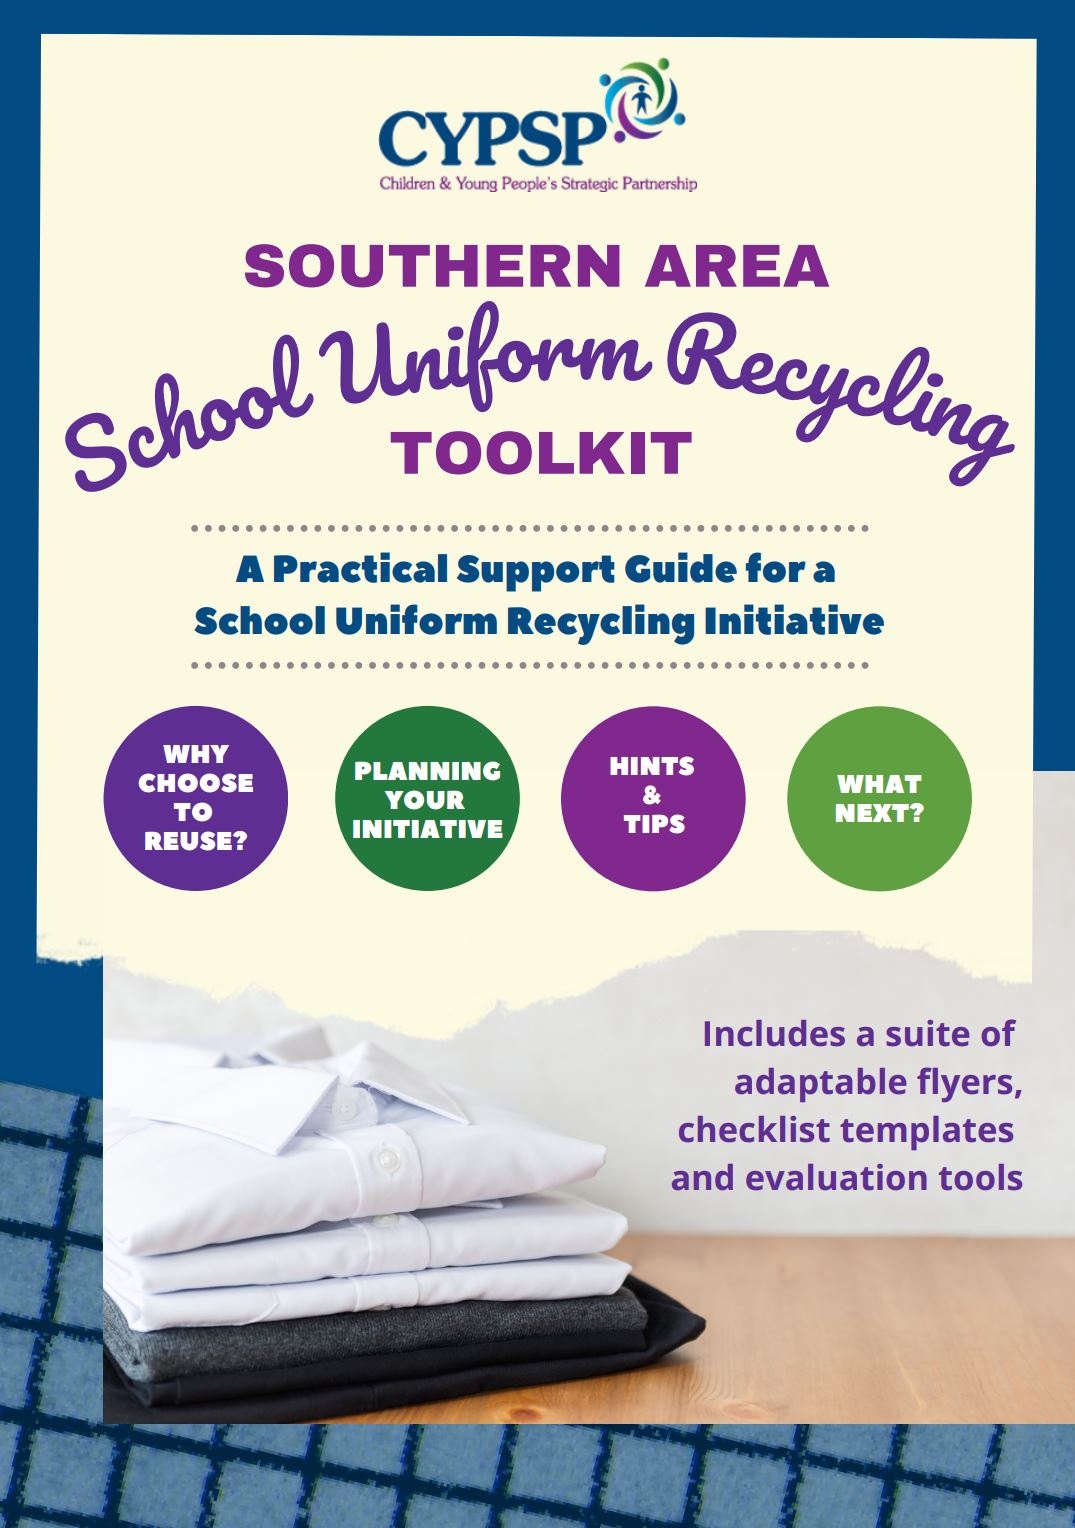 School Uniform Recycling Toolkit Available NOW!